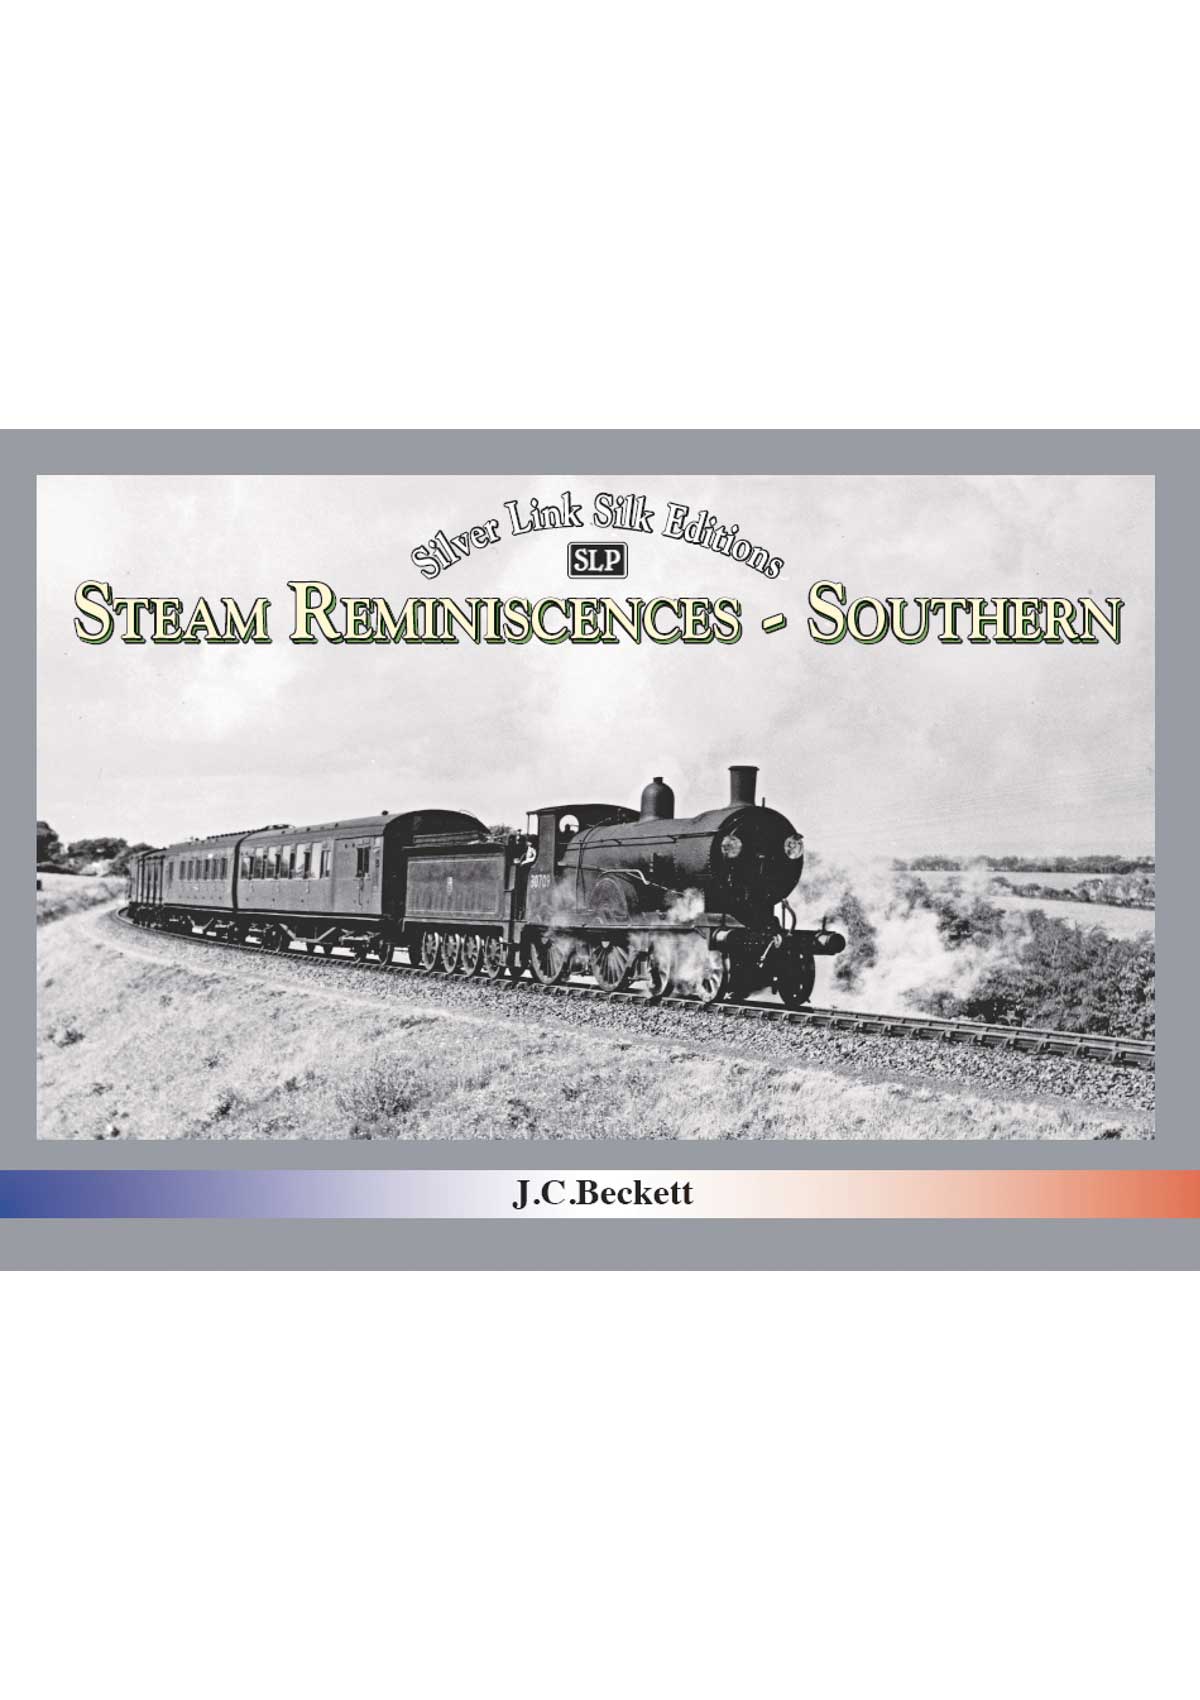 Steam Reminiscences - Southern.